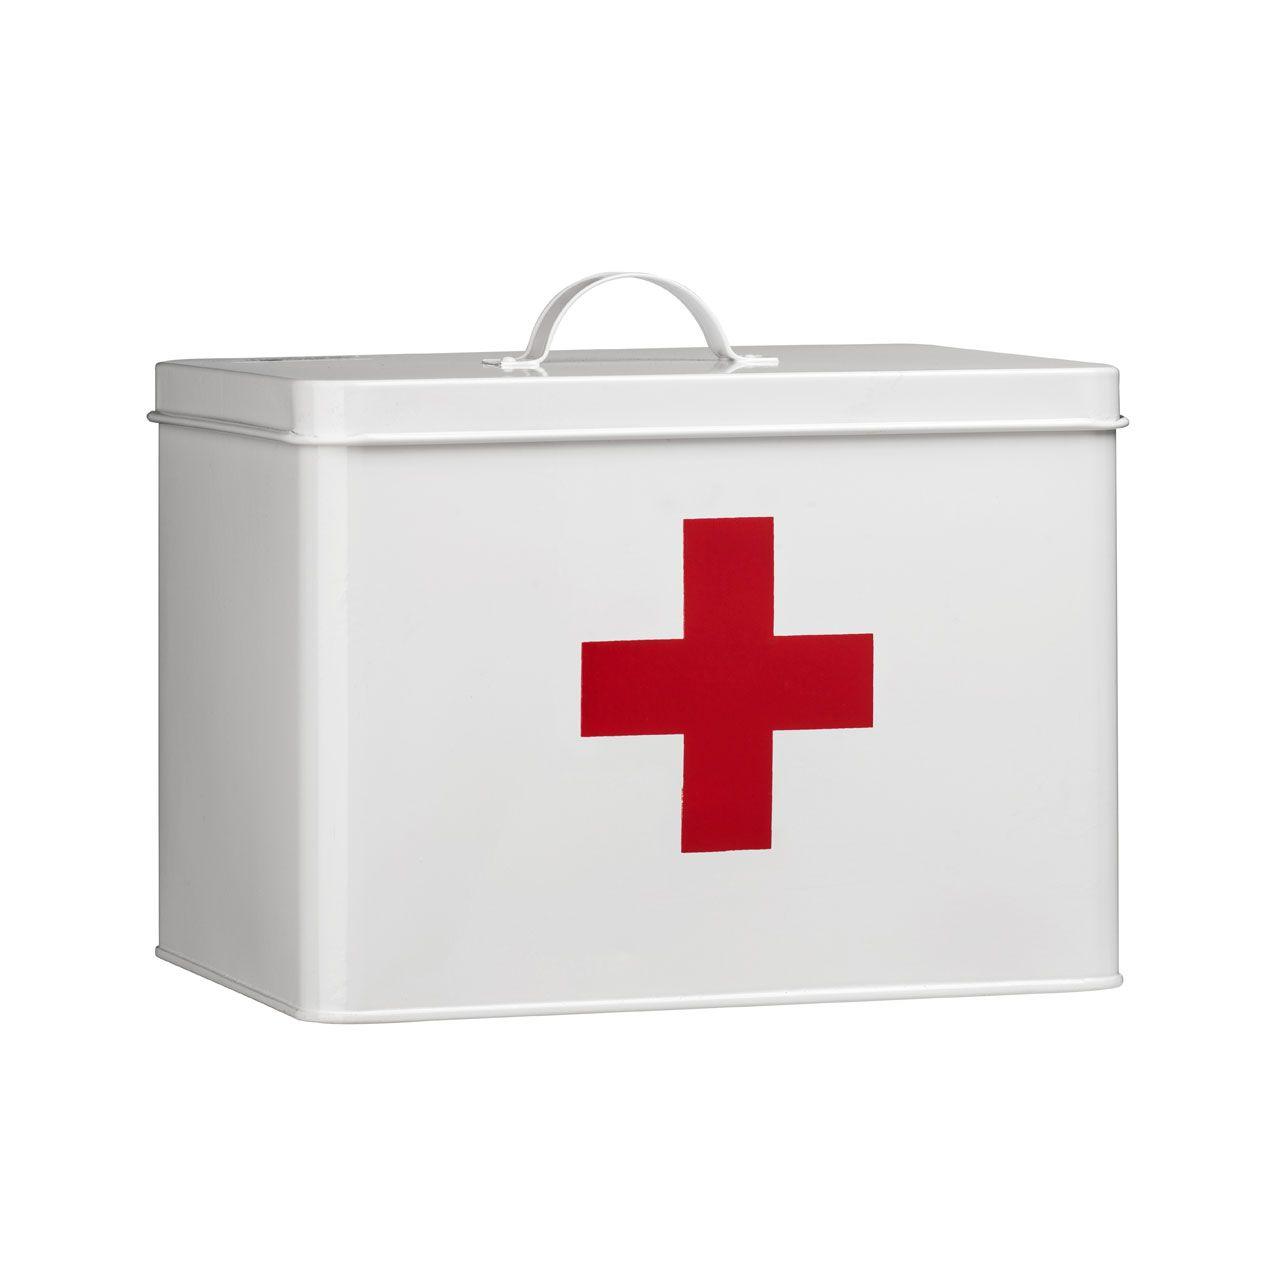 White Box Red Cross Logo - Emergency Kit Medicine First Aid Metal Small Box White Red Cross